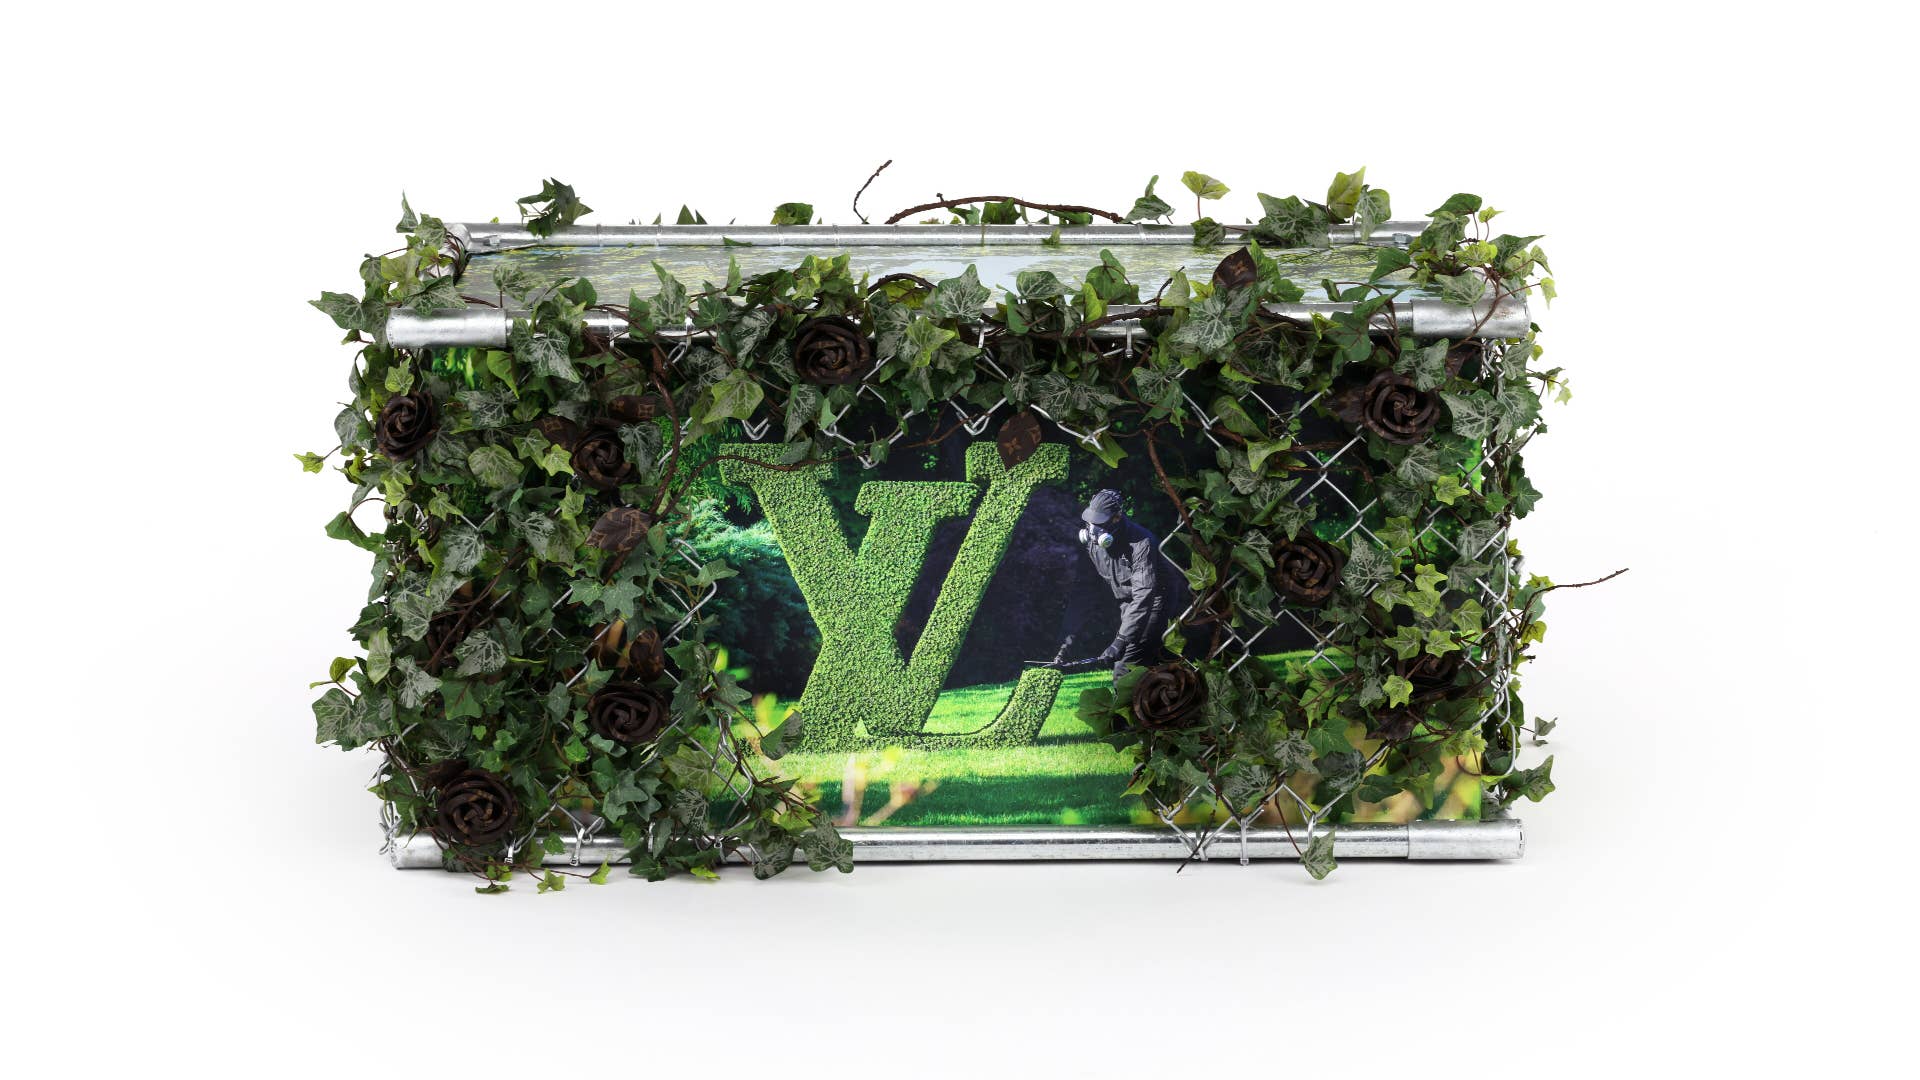 Louis Vuitton commemorates its 200th year with a design